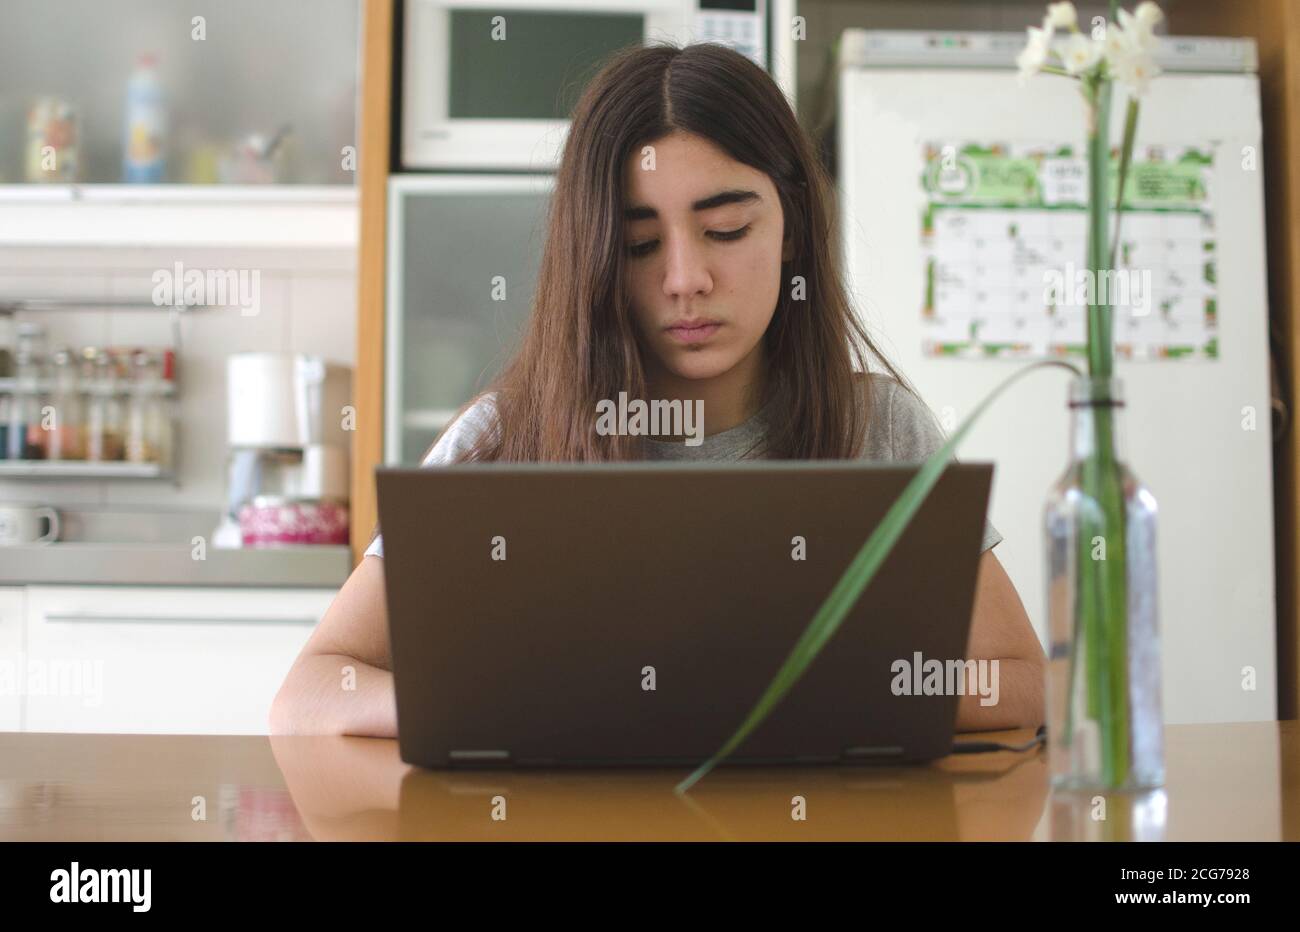 Teenage girl sitting in the kitchen using a laptop Stock Photo